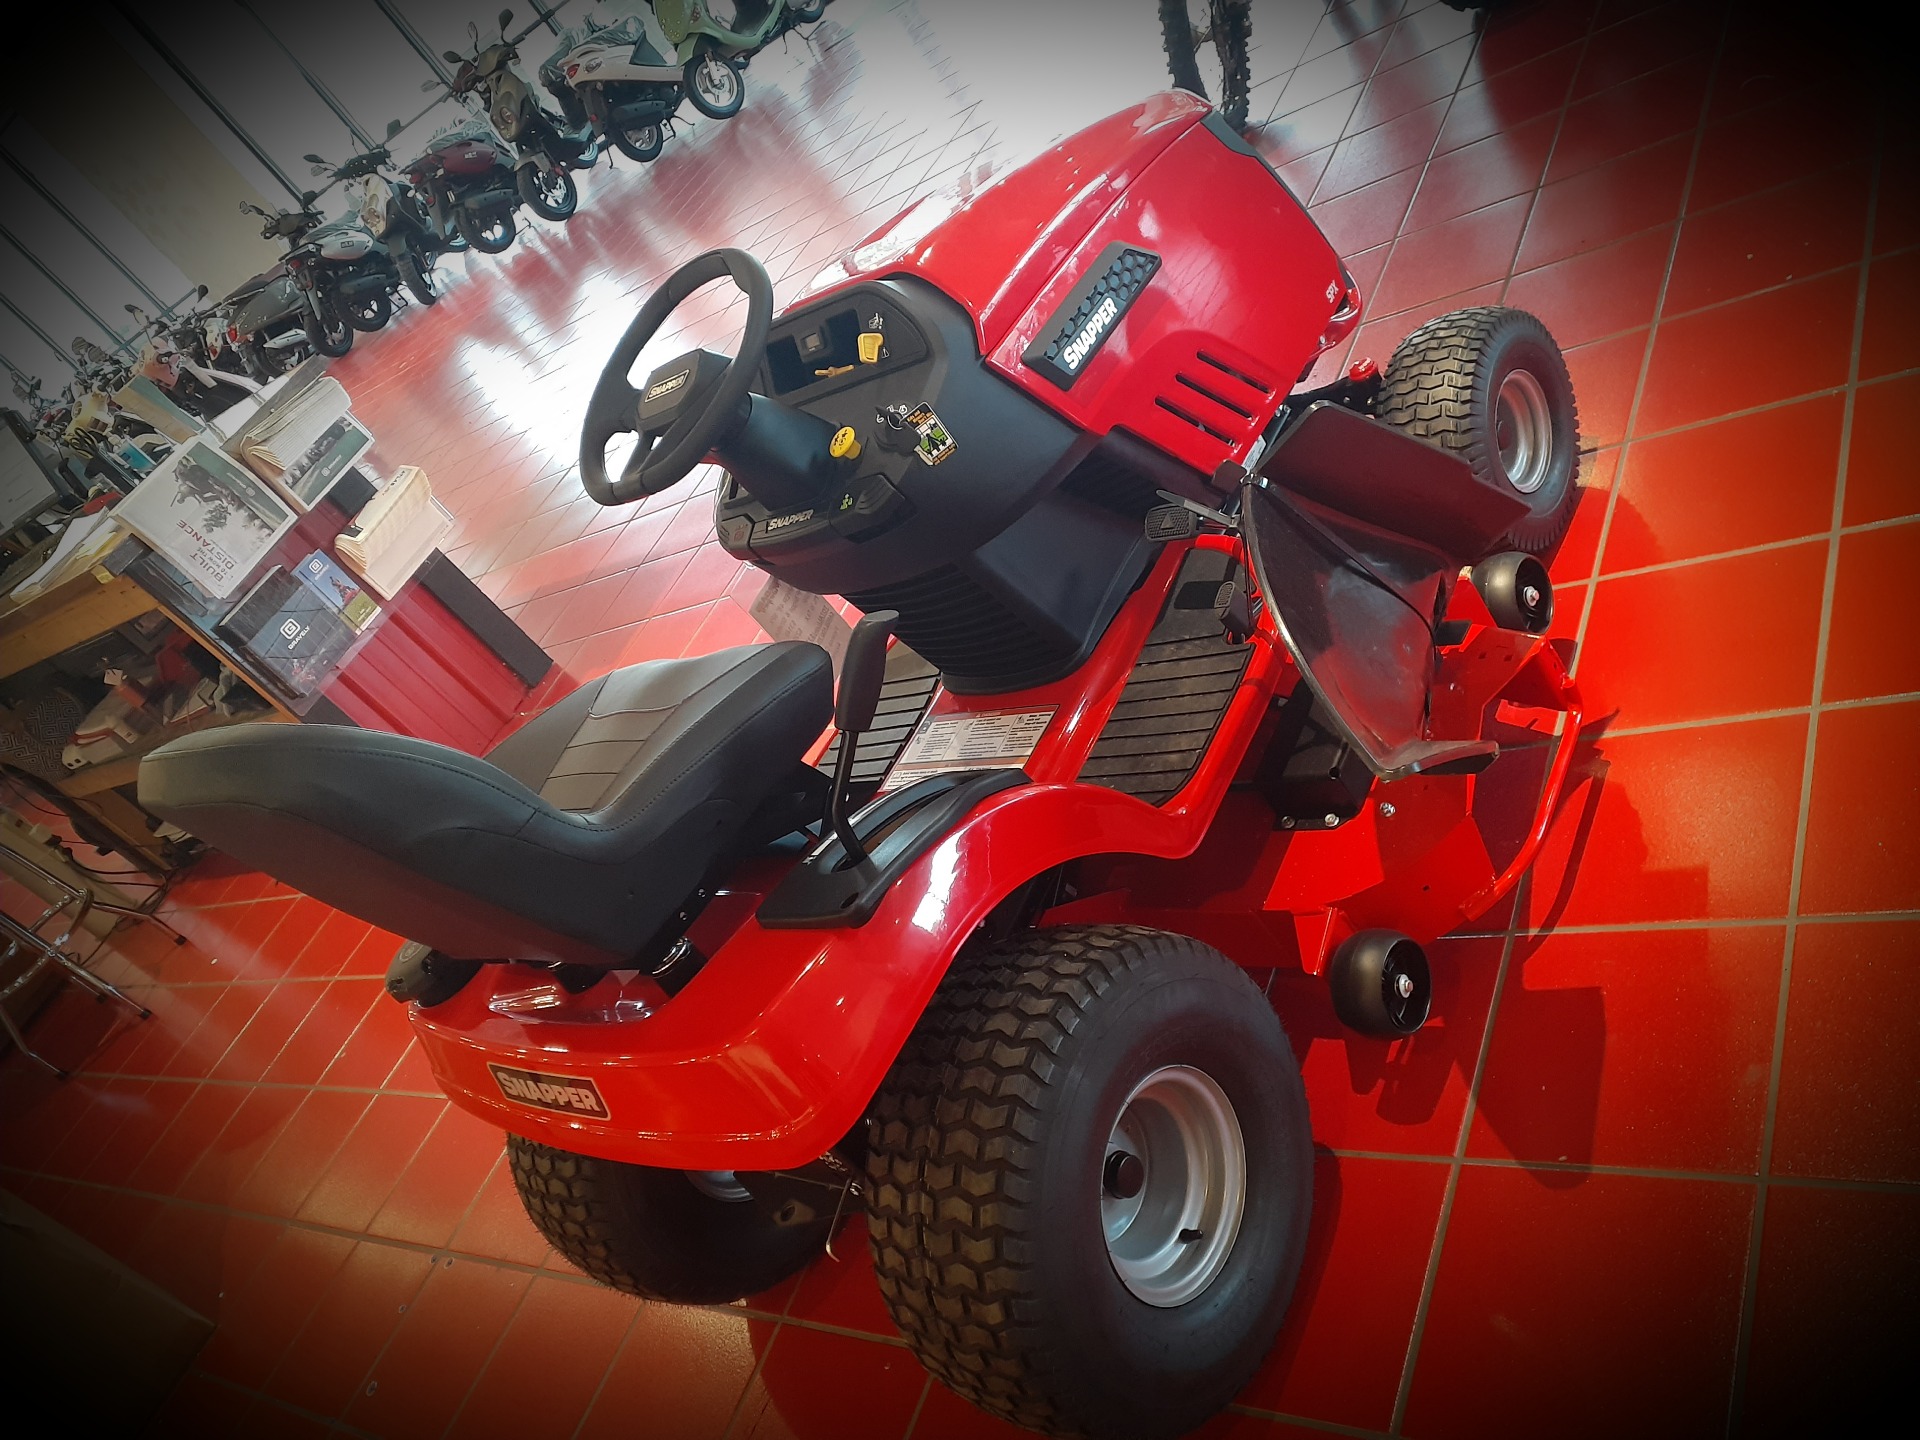 2021 Snapper SPX 48 in. Briggs & Stratton Professional 25 hp in Lafayette, Indiana - Photo 11